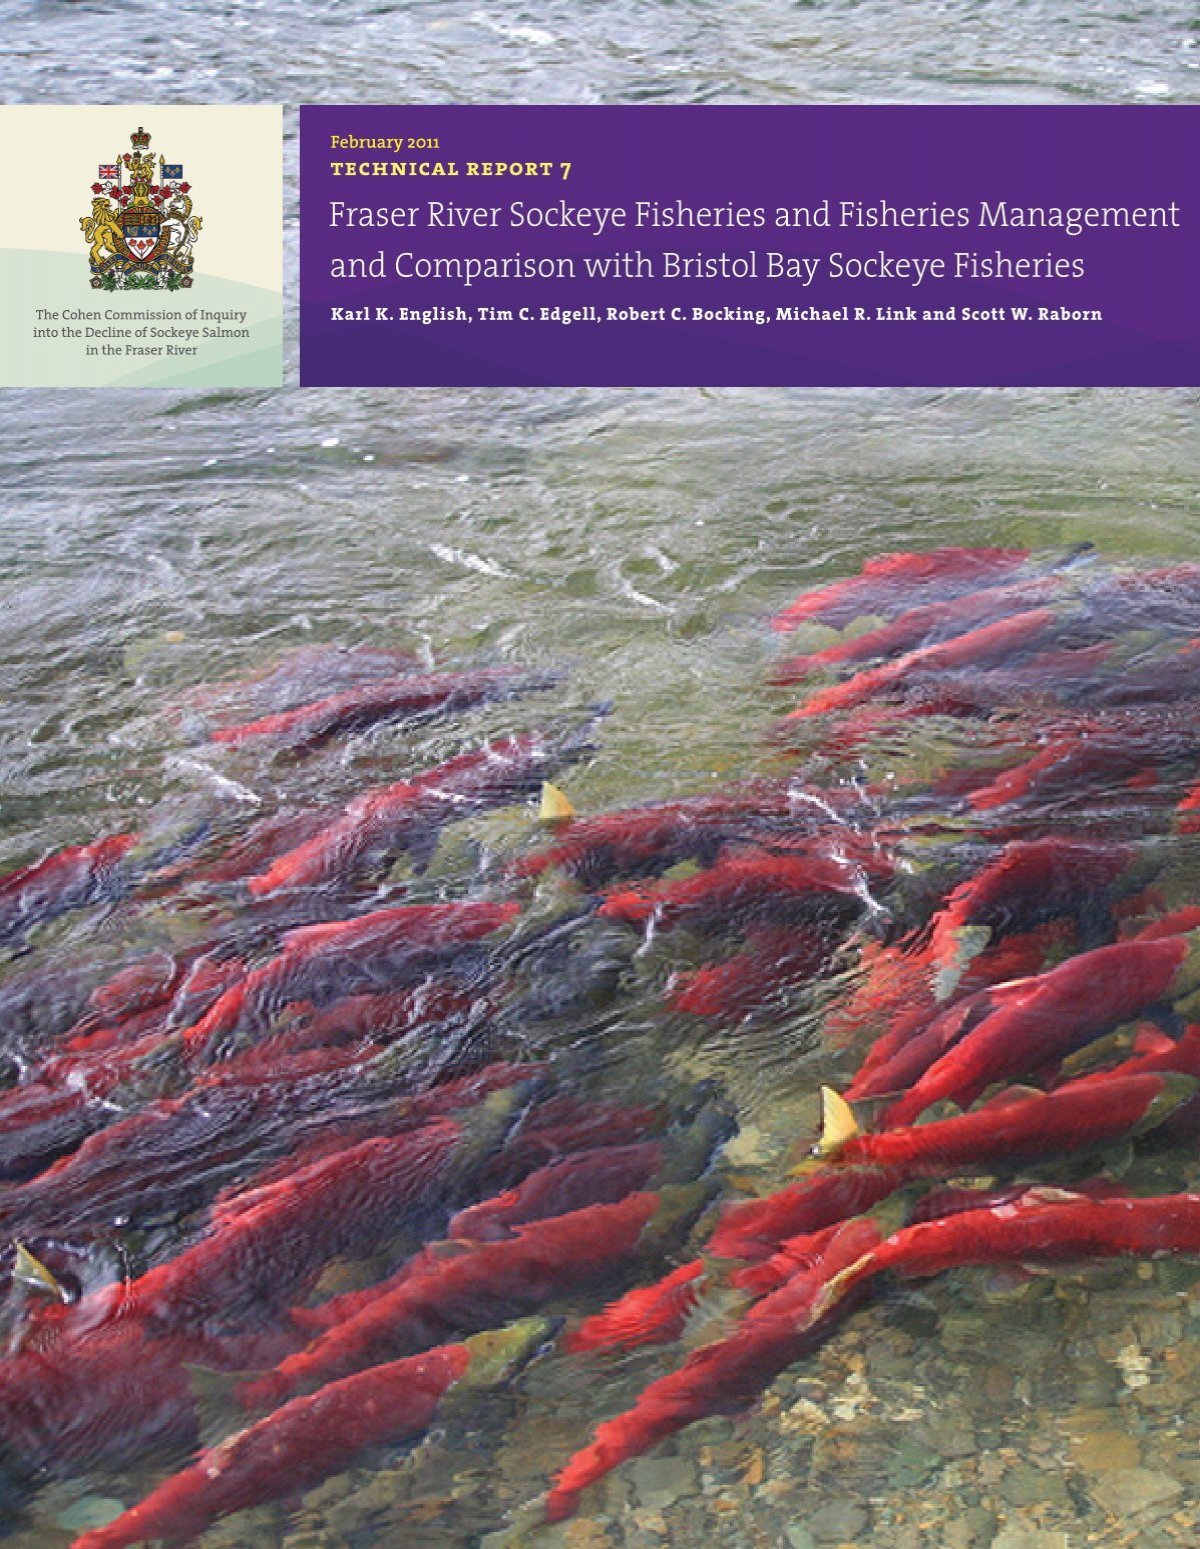 Fraser River Sockeye Fisheries and Fisheries Management - Cohen